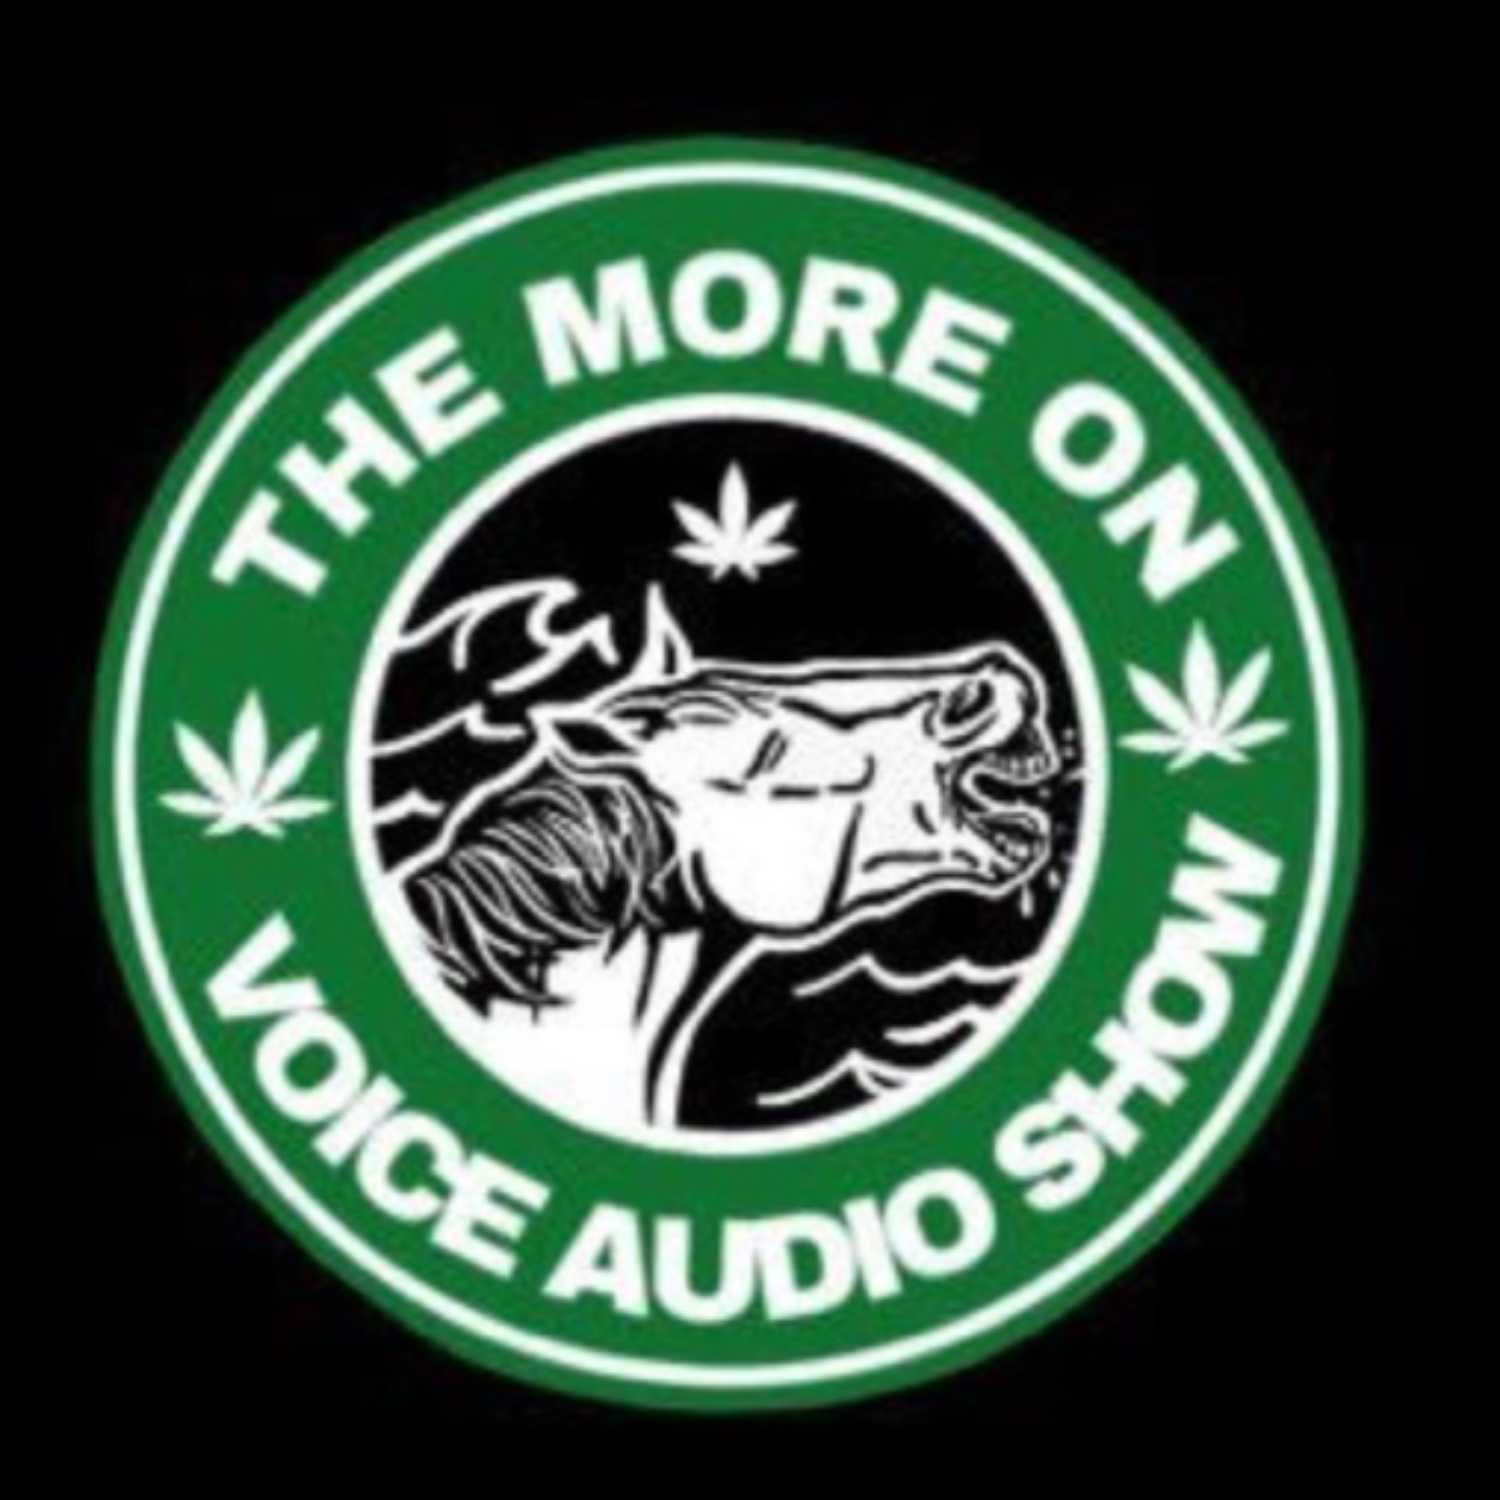 The More On Voice Audio Show: Episode 42